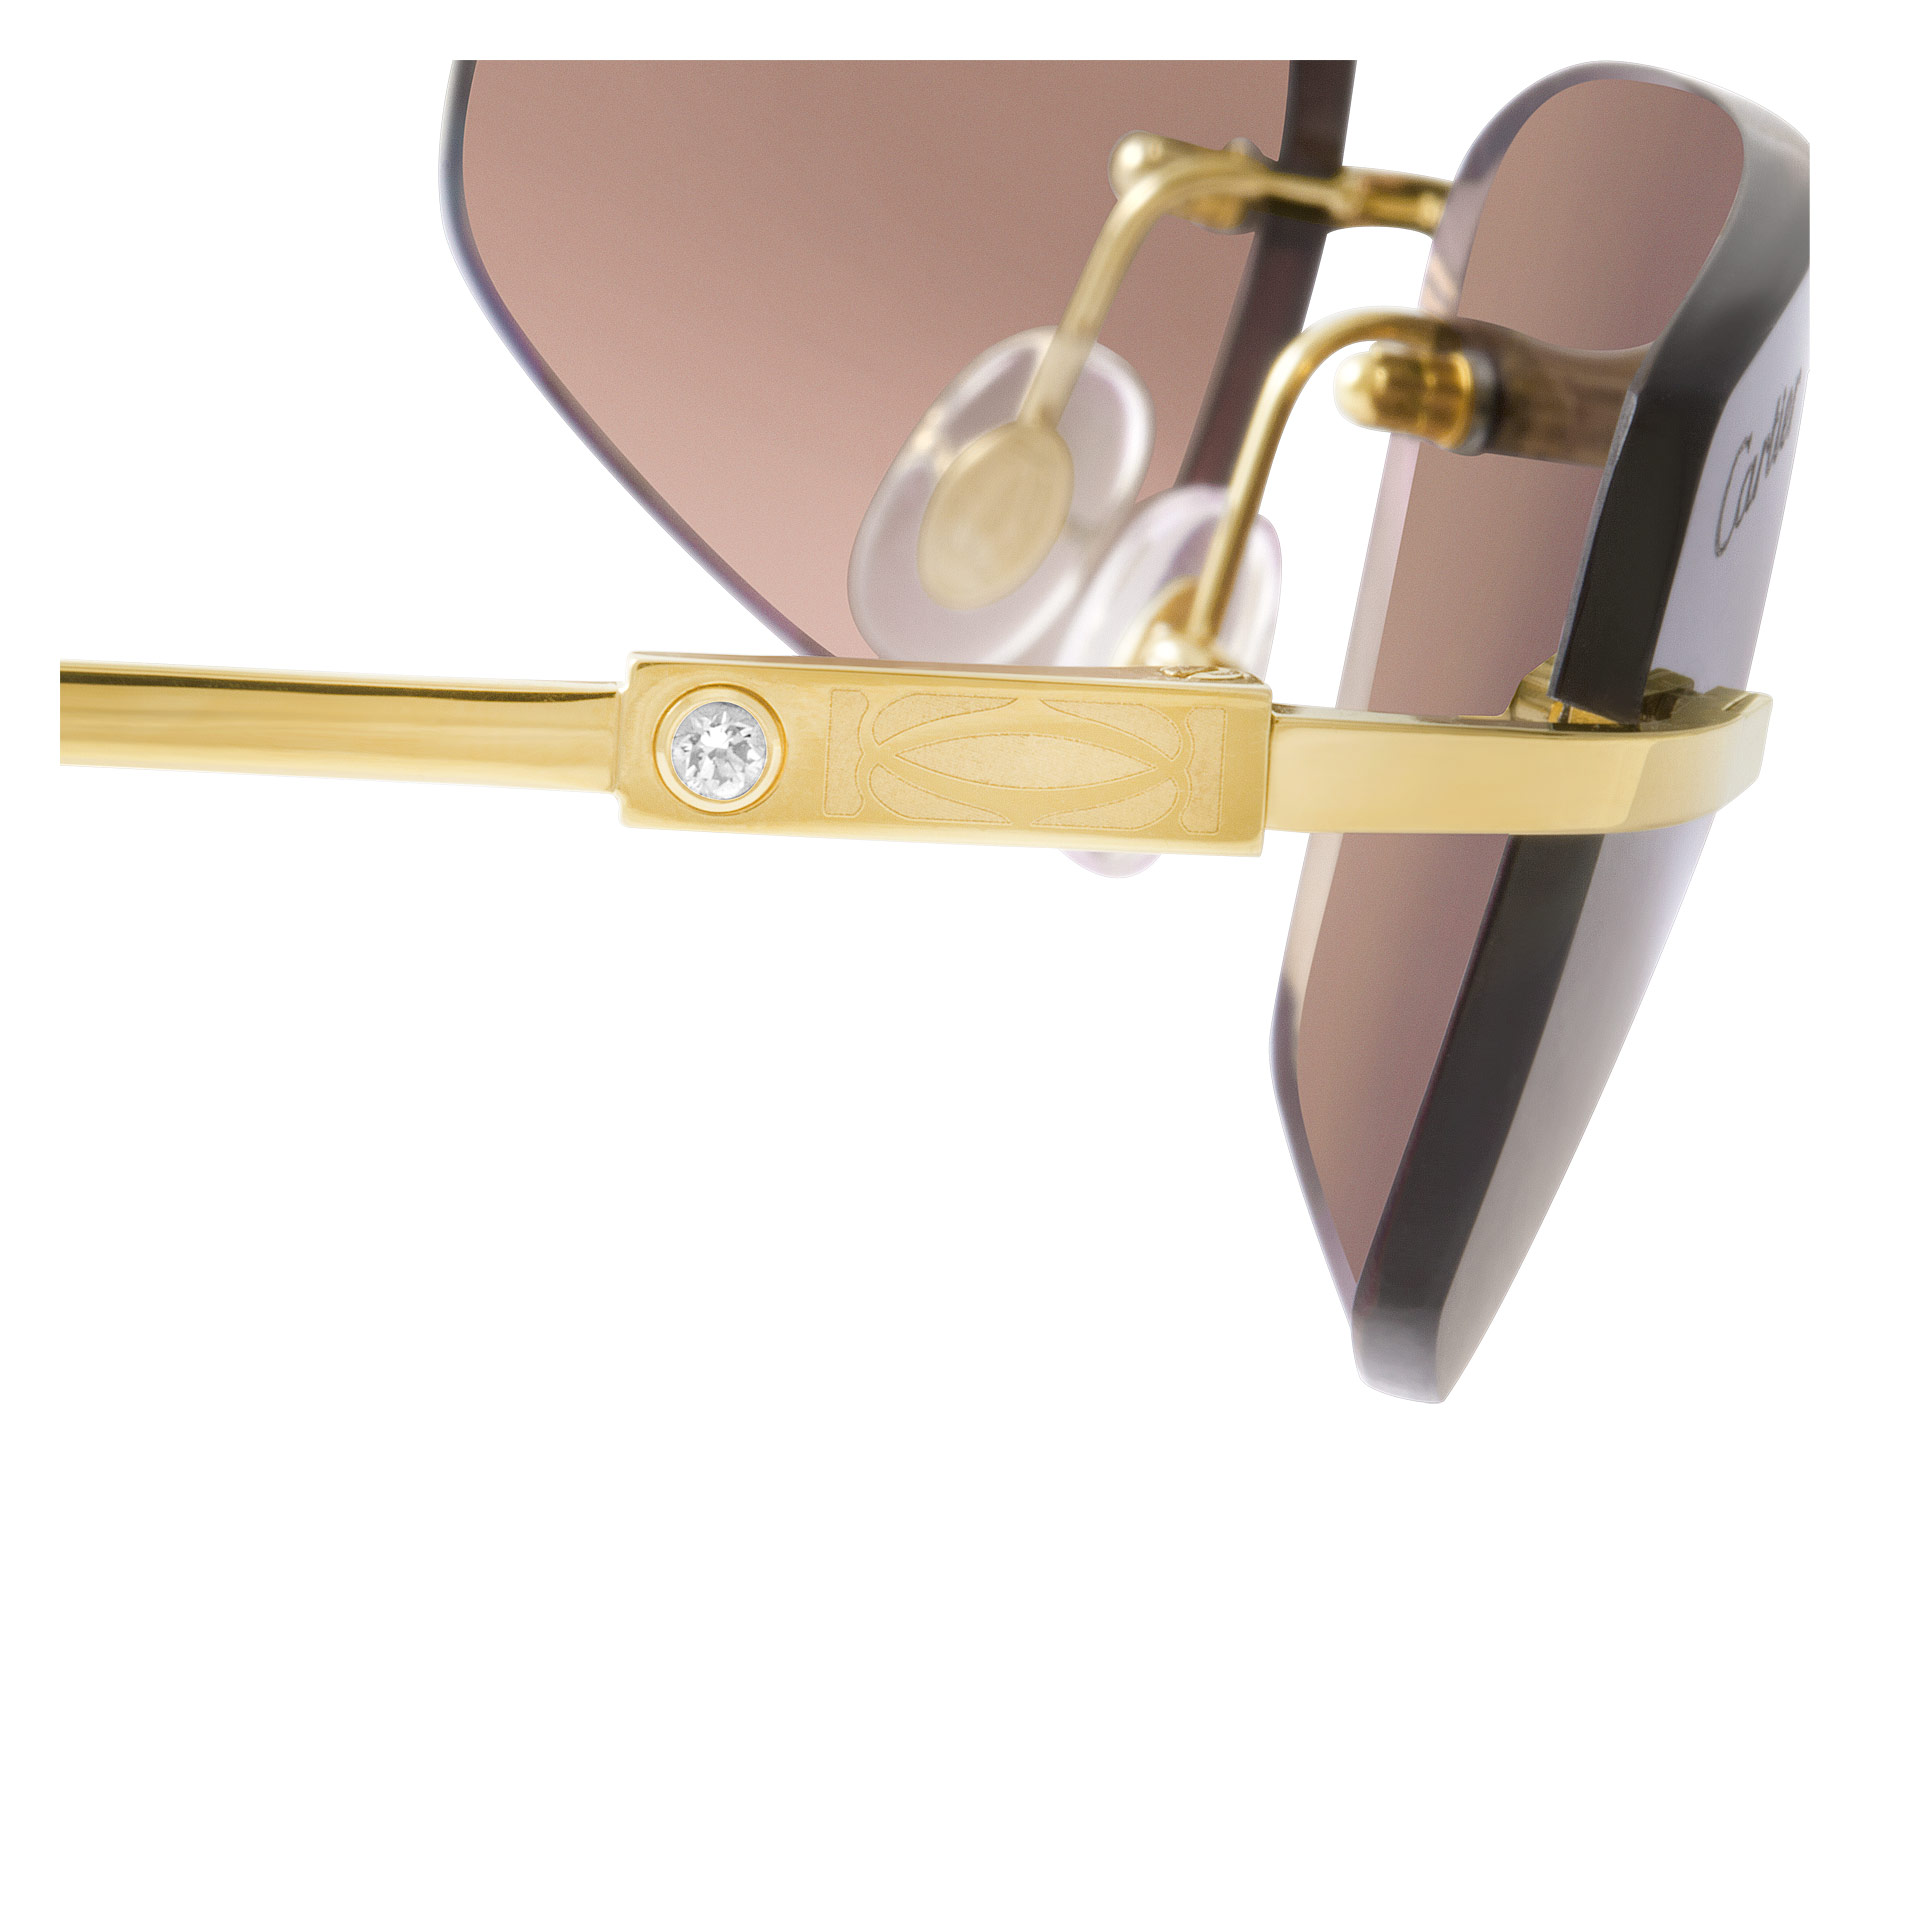 Cartier glasses in 18k gold plated frame with diamond accent at the temple image 4